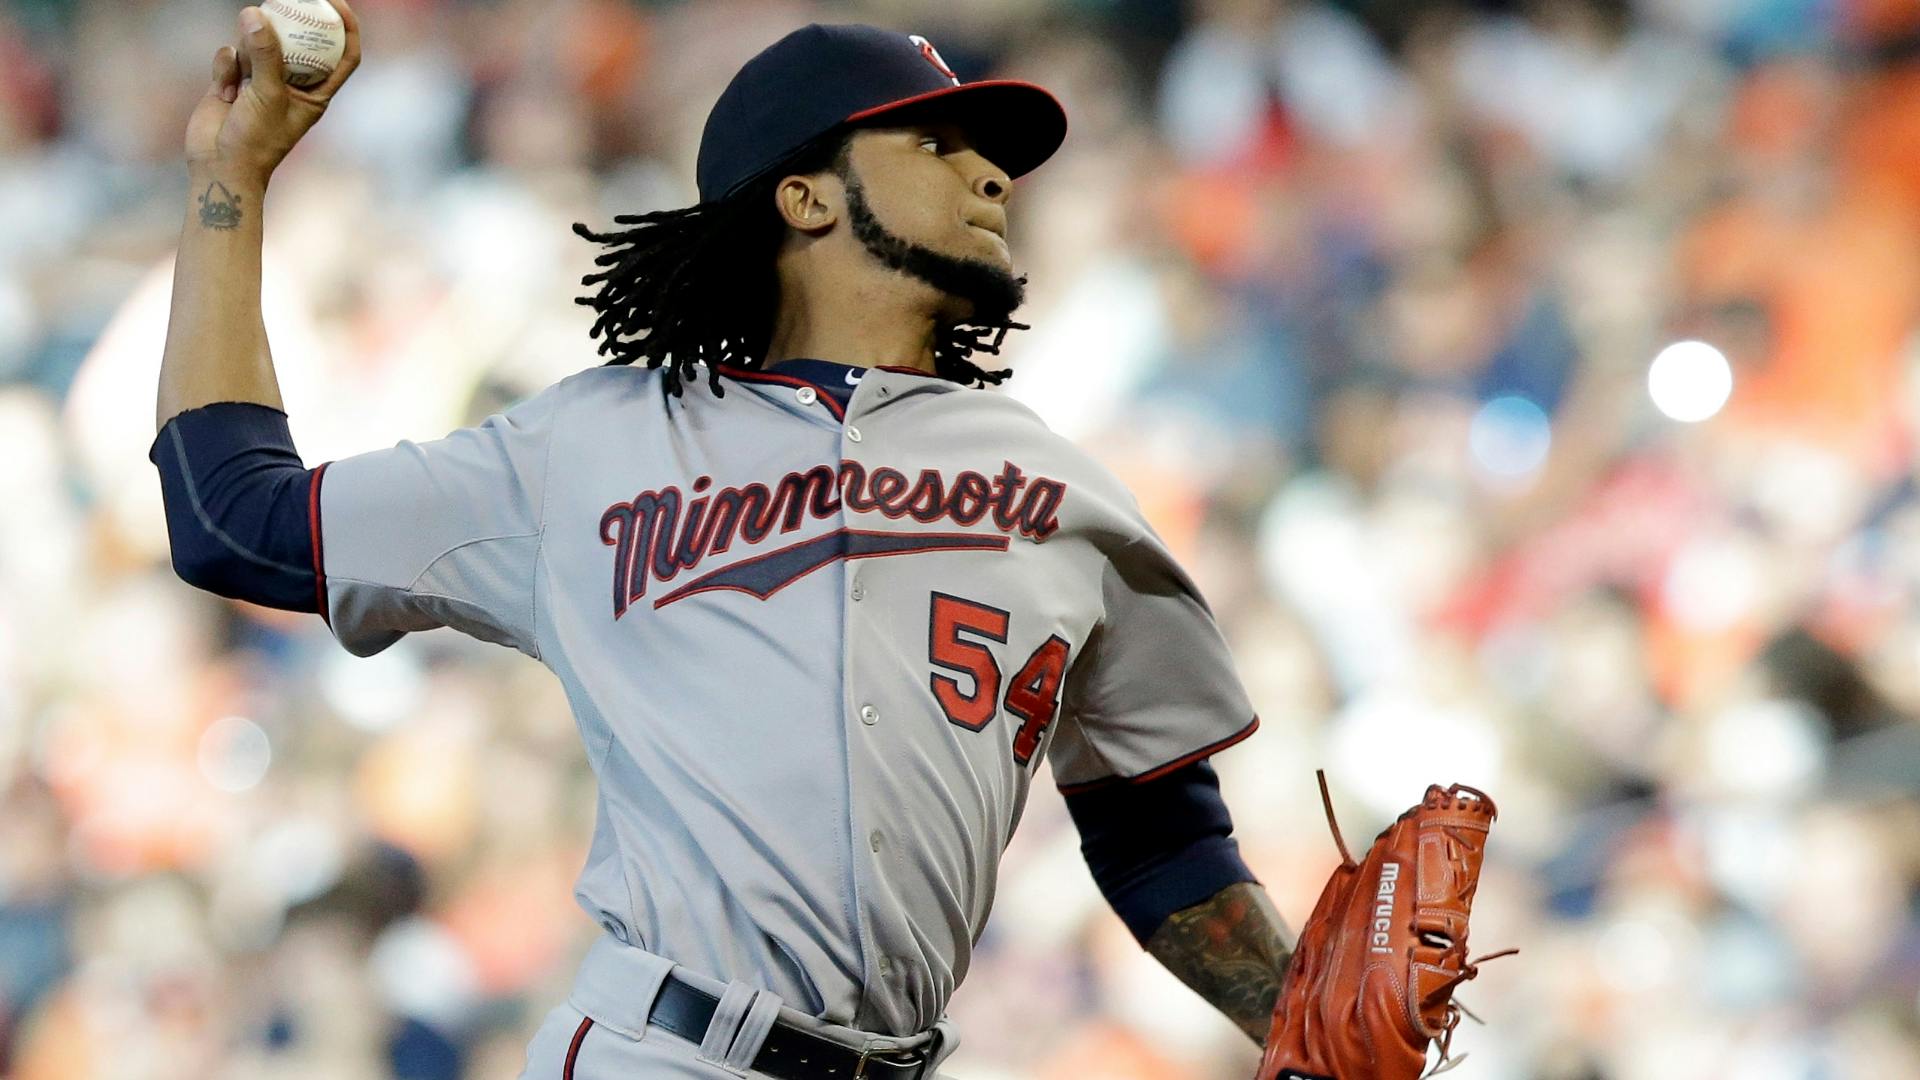 Twins righthander Ervin Santana says he wasn't concerned about innings, just trying to keep the White Sox off bases by throwing strikes.